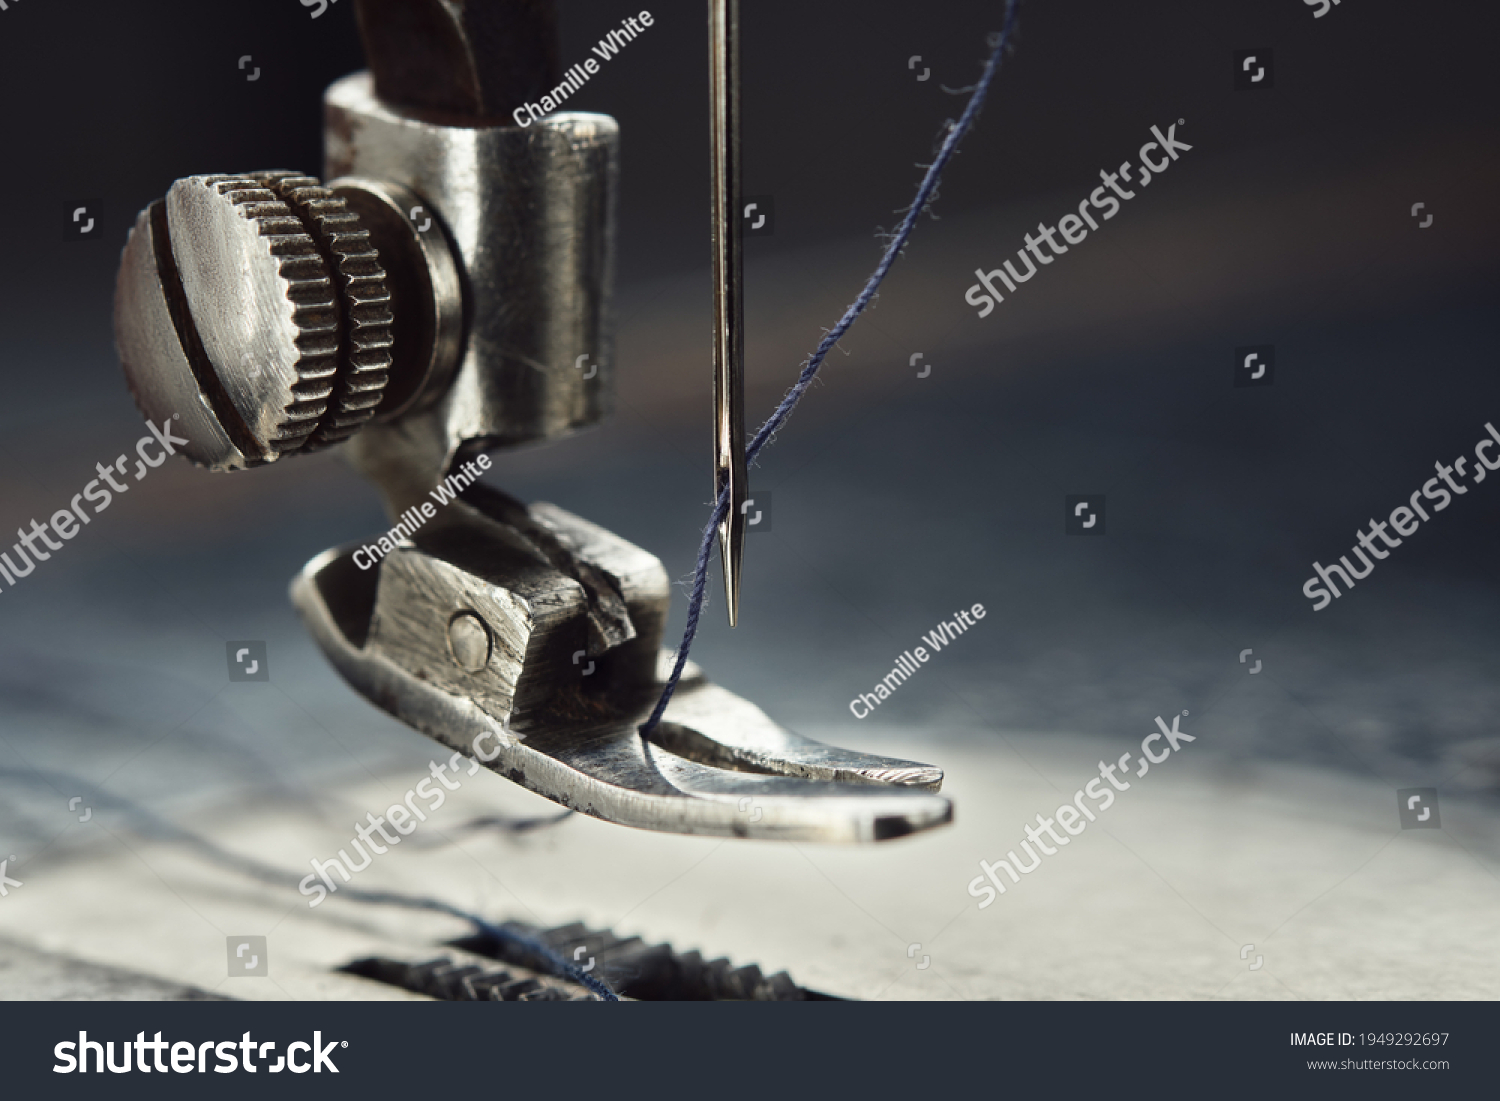 Close up of sewing machine needle with thread. Working part of antique sewing machine. #1949292697